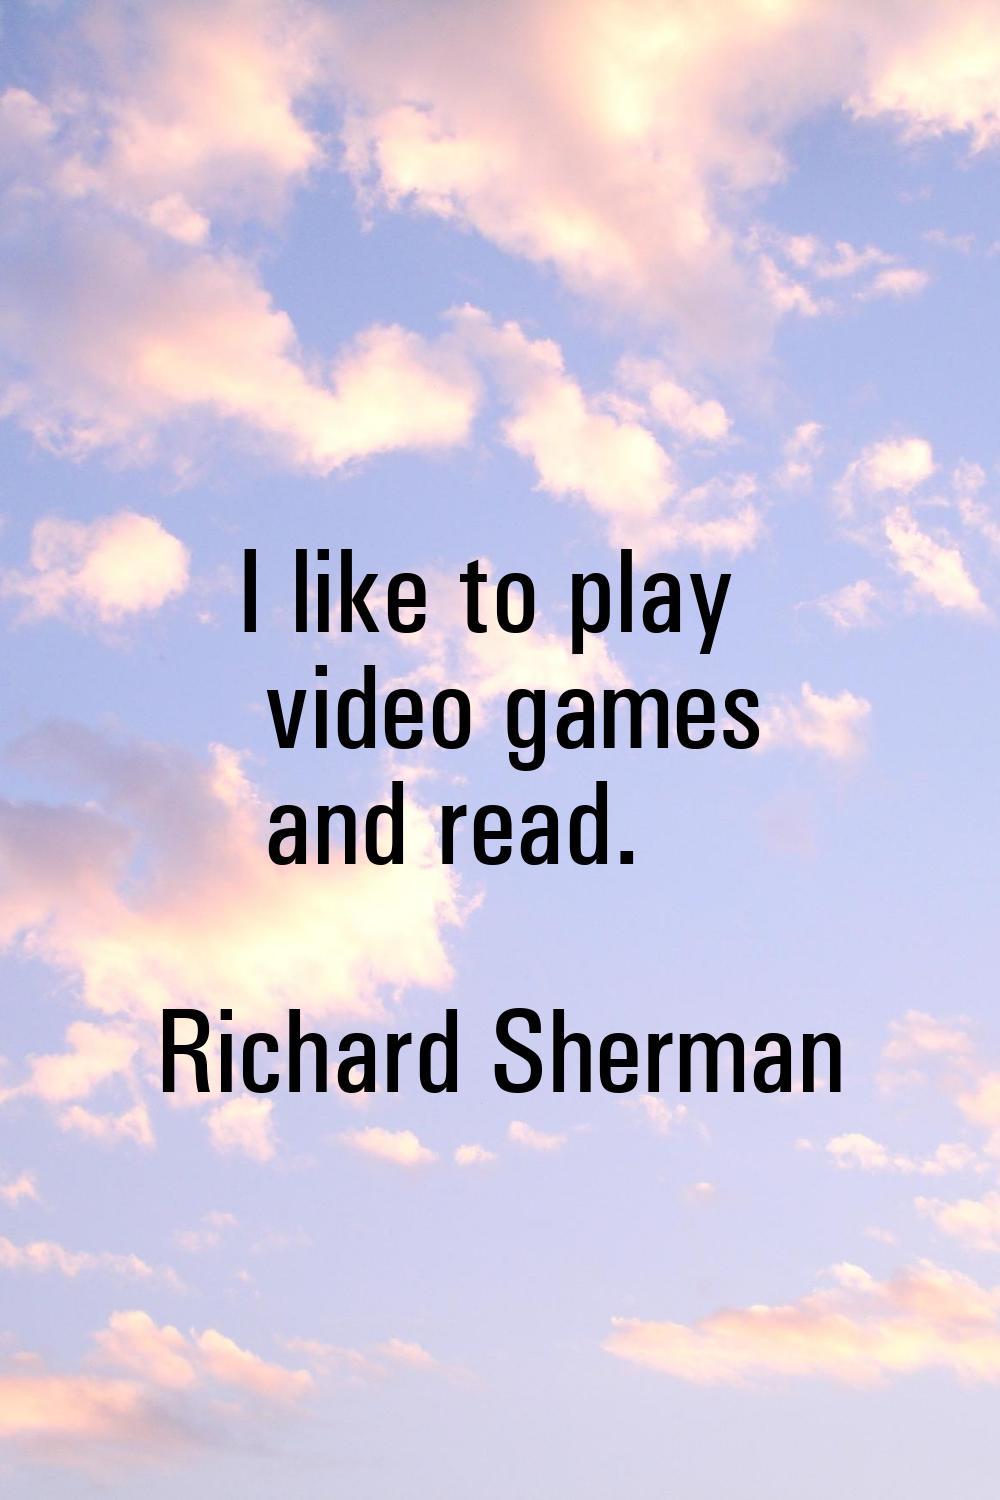 I like to play video games and read.